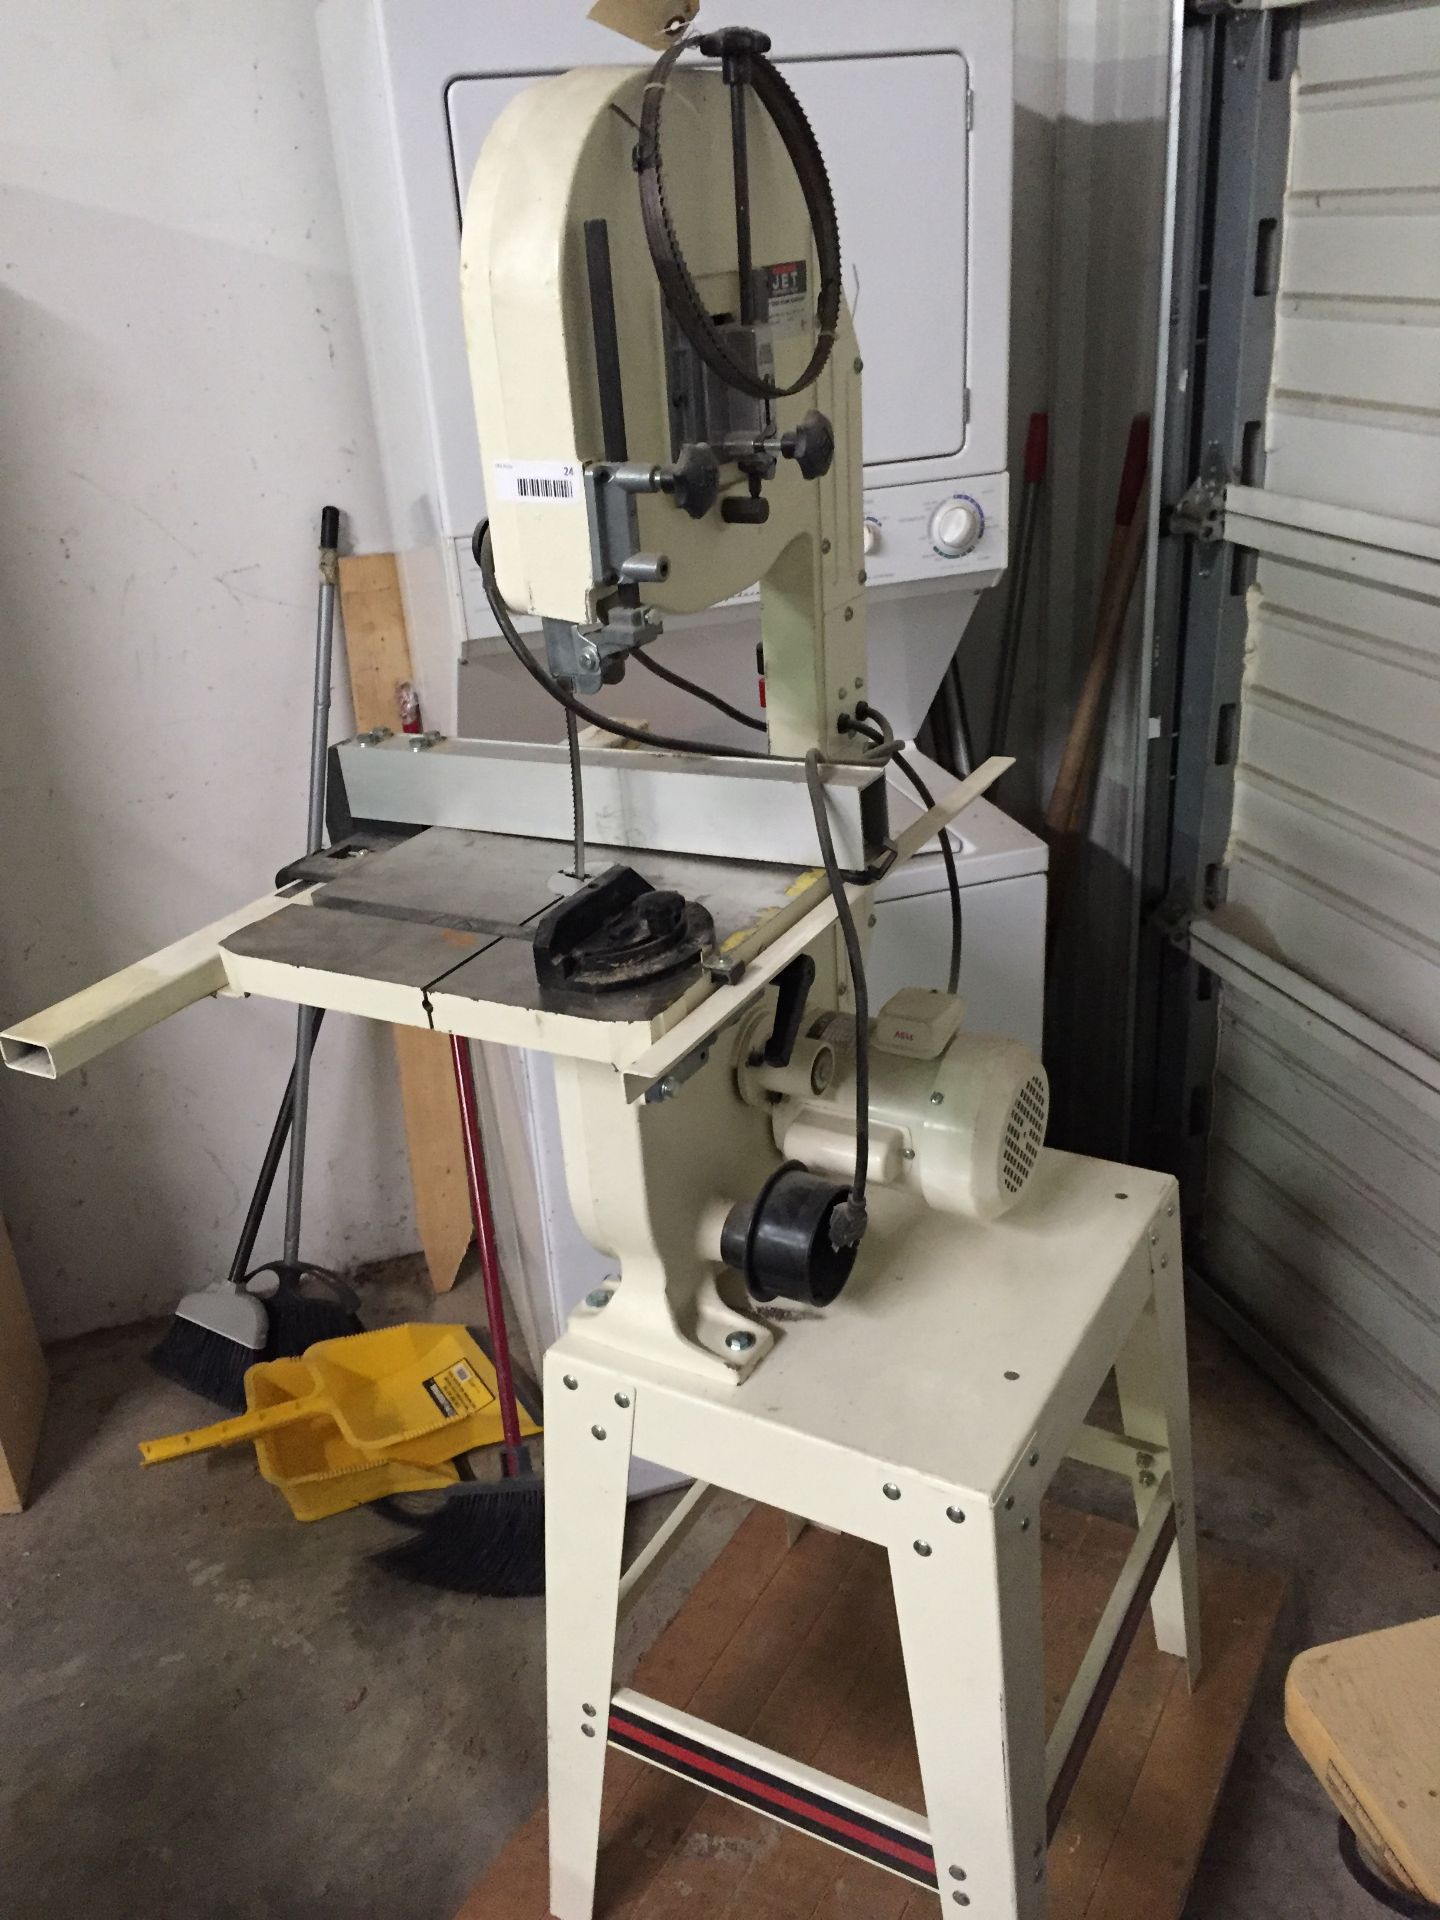 Jet 12" Vertical Band Saw M/N JWBS-120S, stock # 708901, with 24" X 36" wood dolly